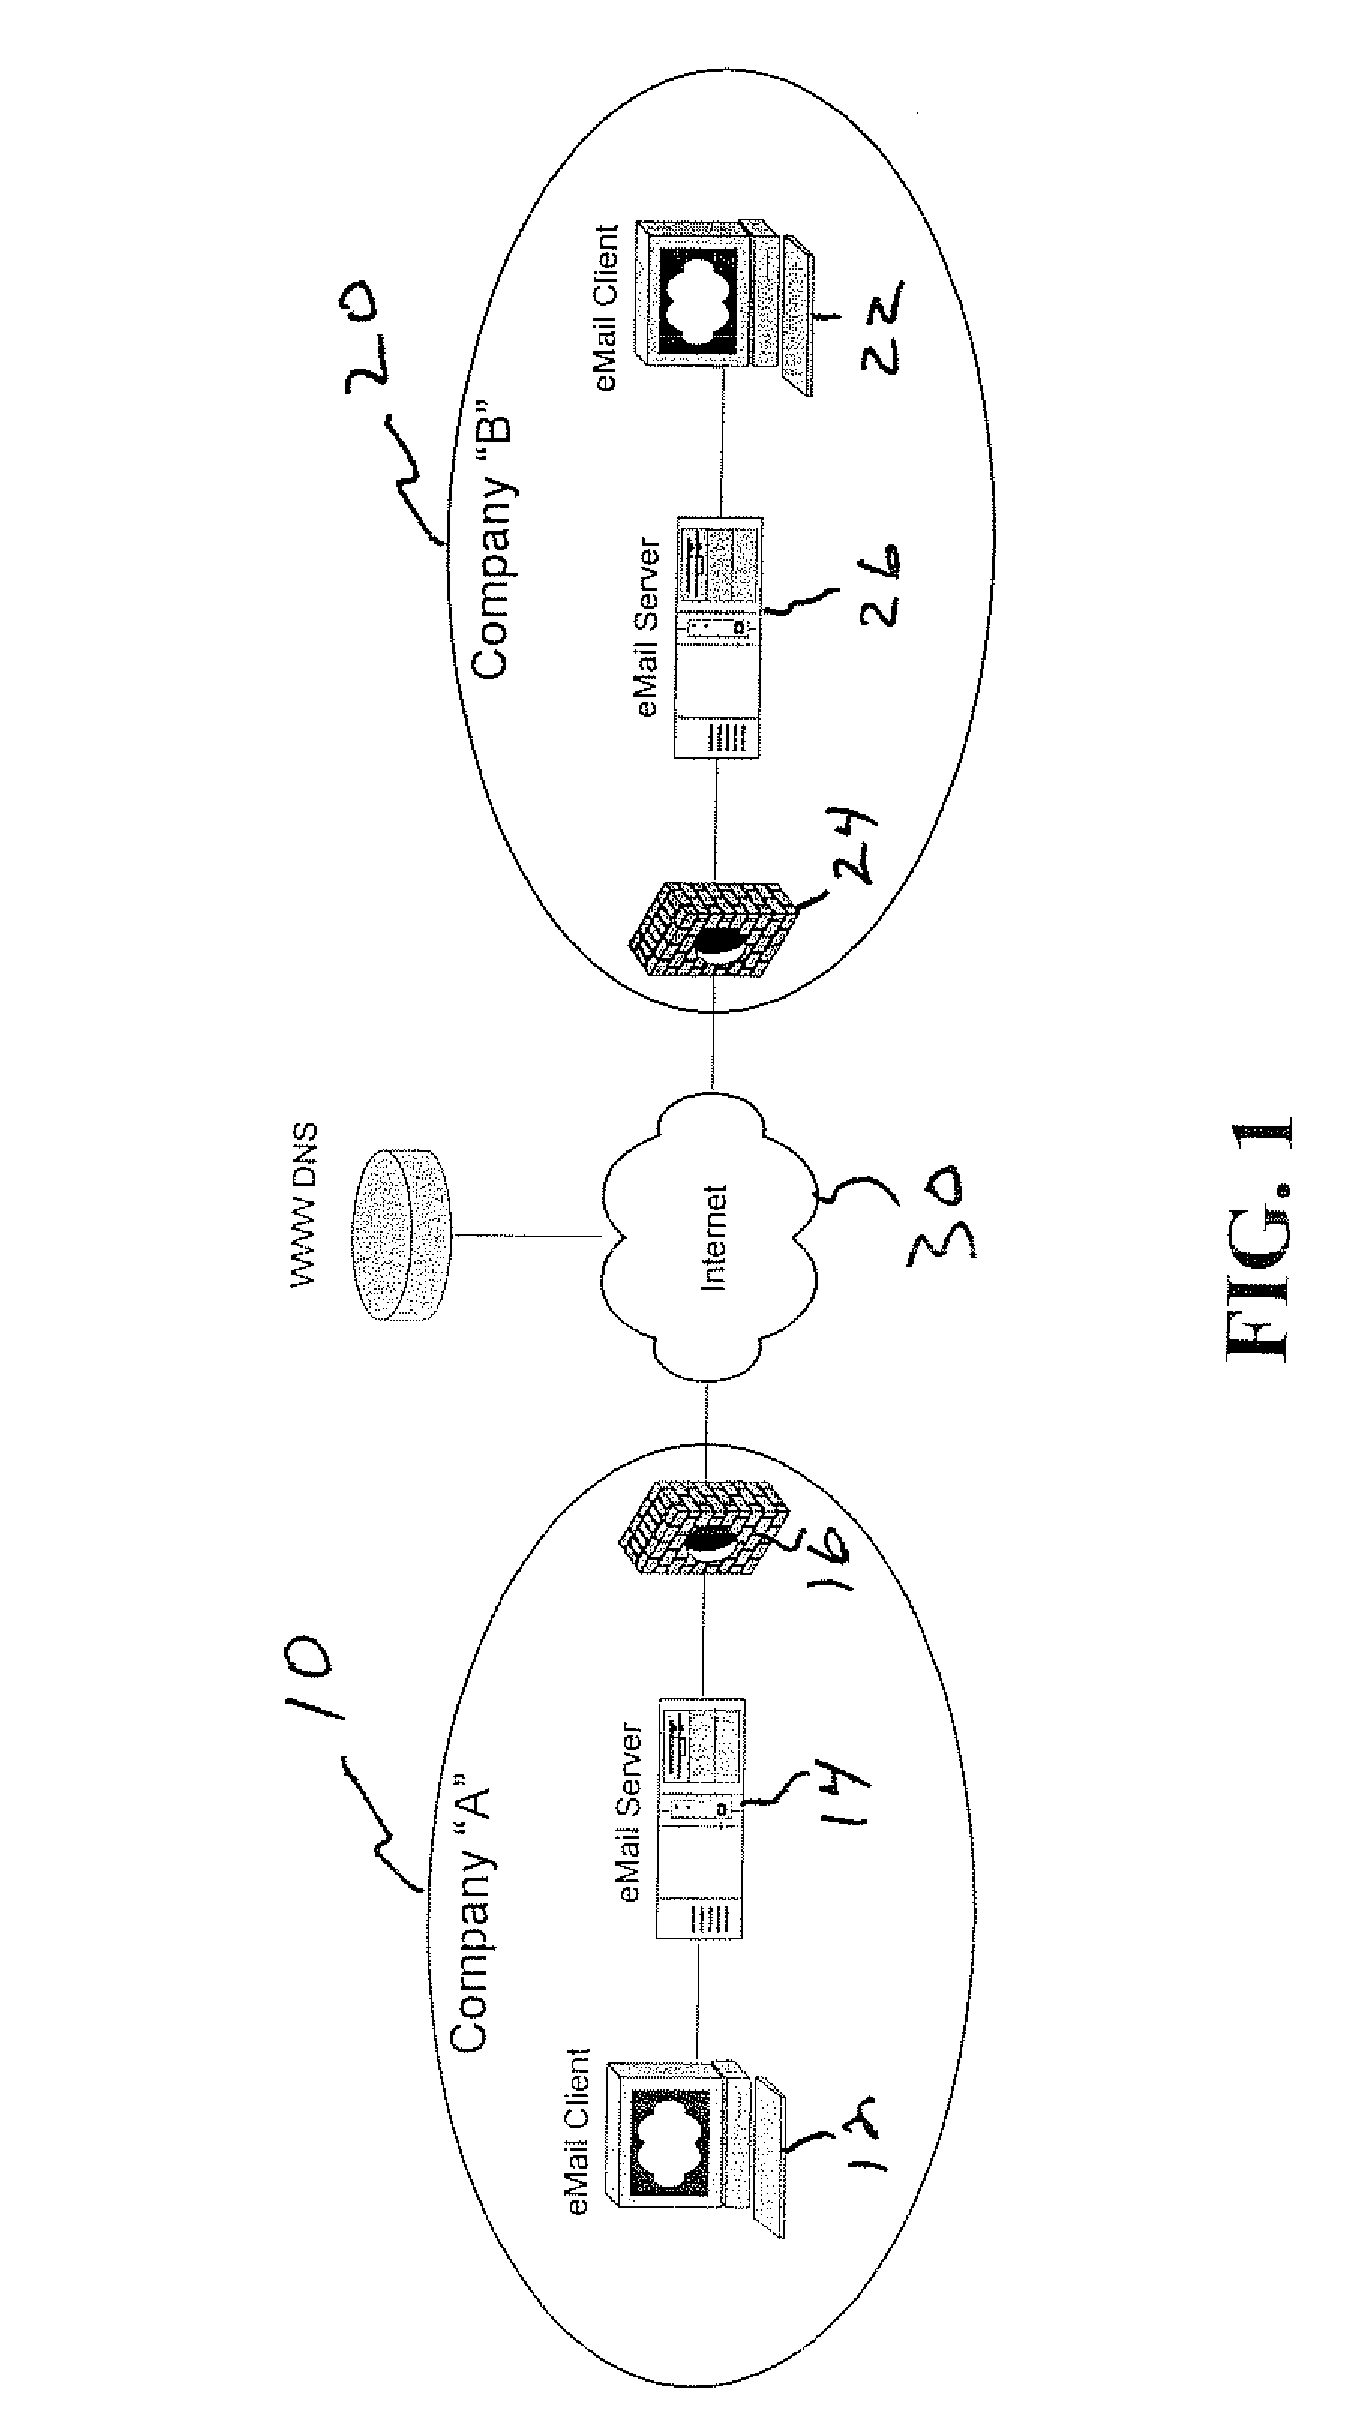 System and methods for reduction of unwanted electronic correspondence